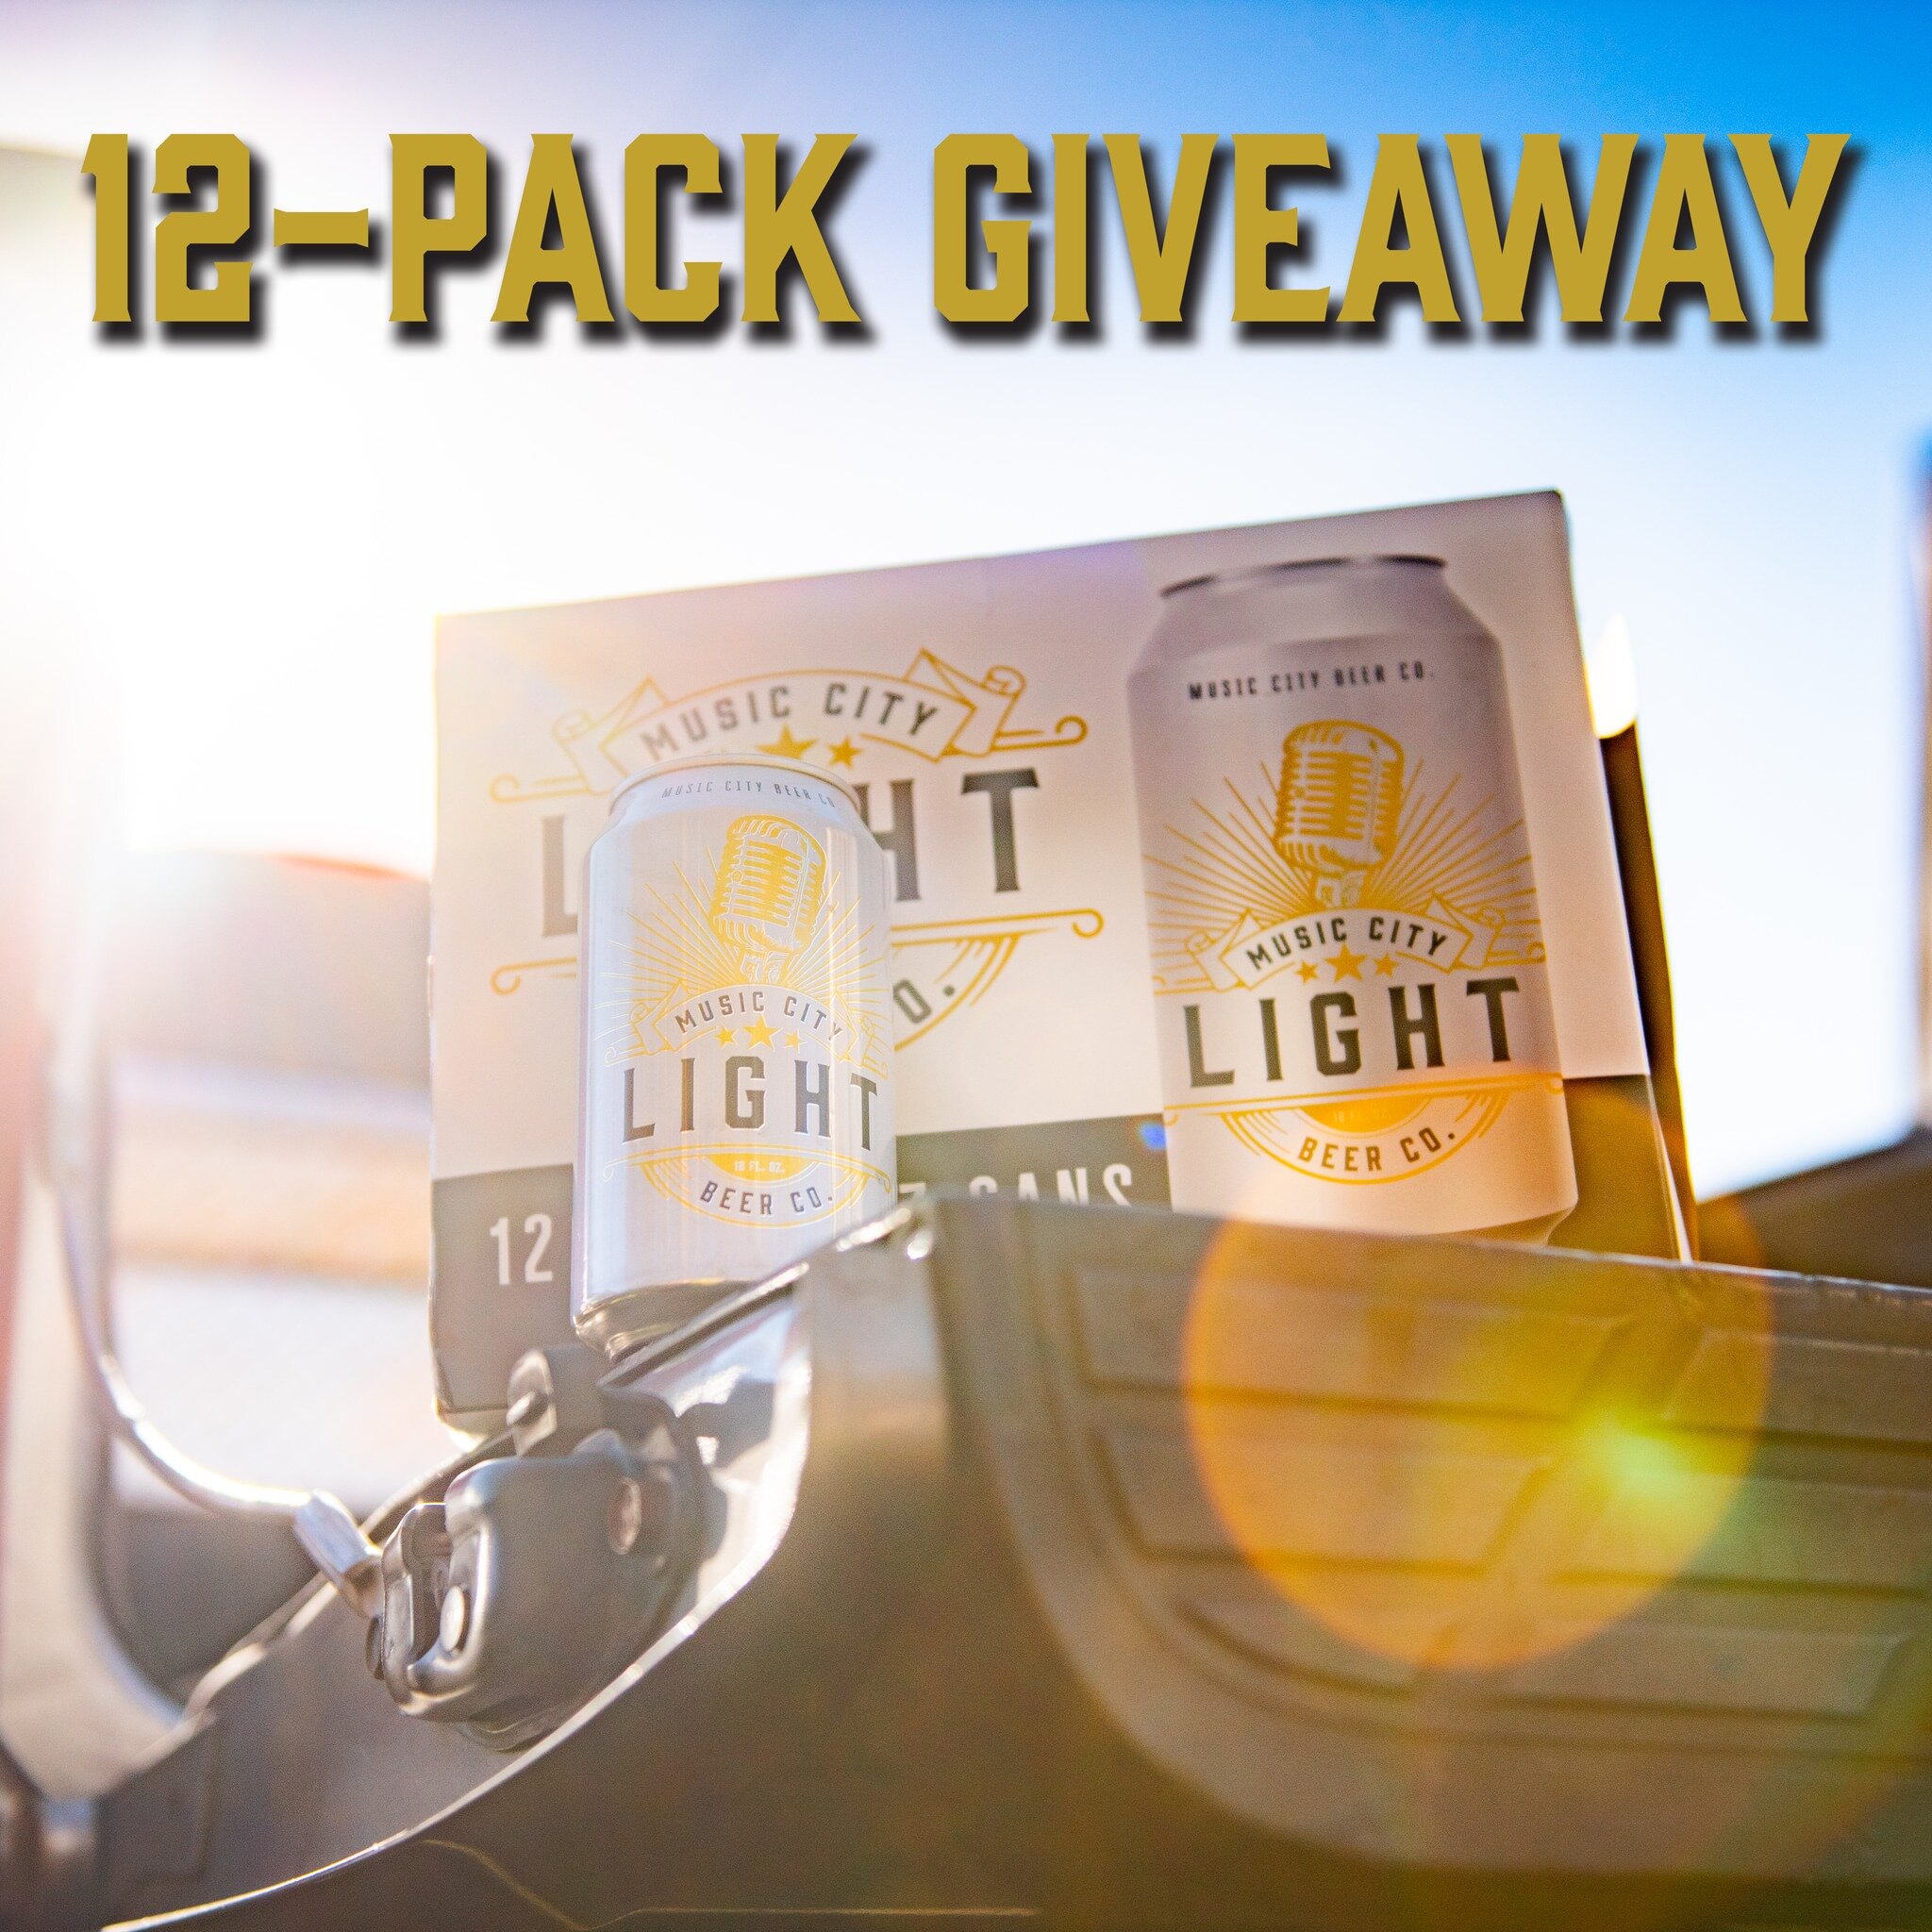 This Friday, 10 lucky people will win 12-packs of Music City Light!

Just tune in to @1029thebuzz from 9am to 7pm on Friday for a chance to win every hour!

#OurTownOurBeer